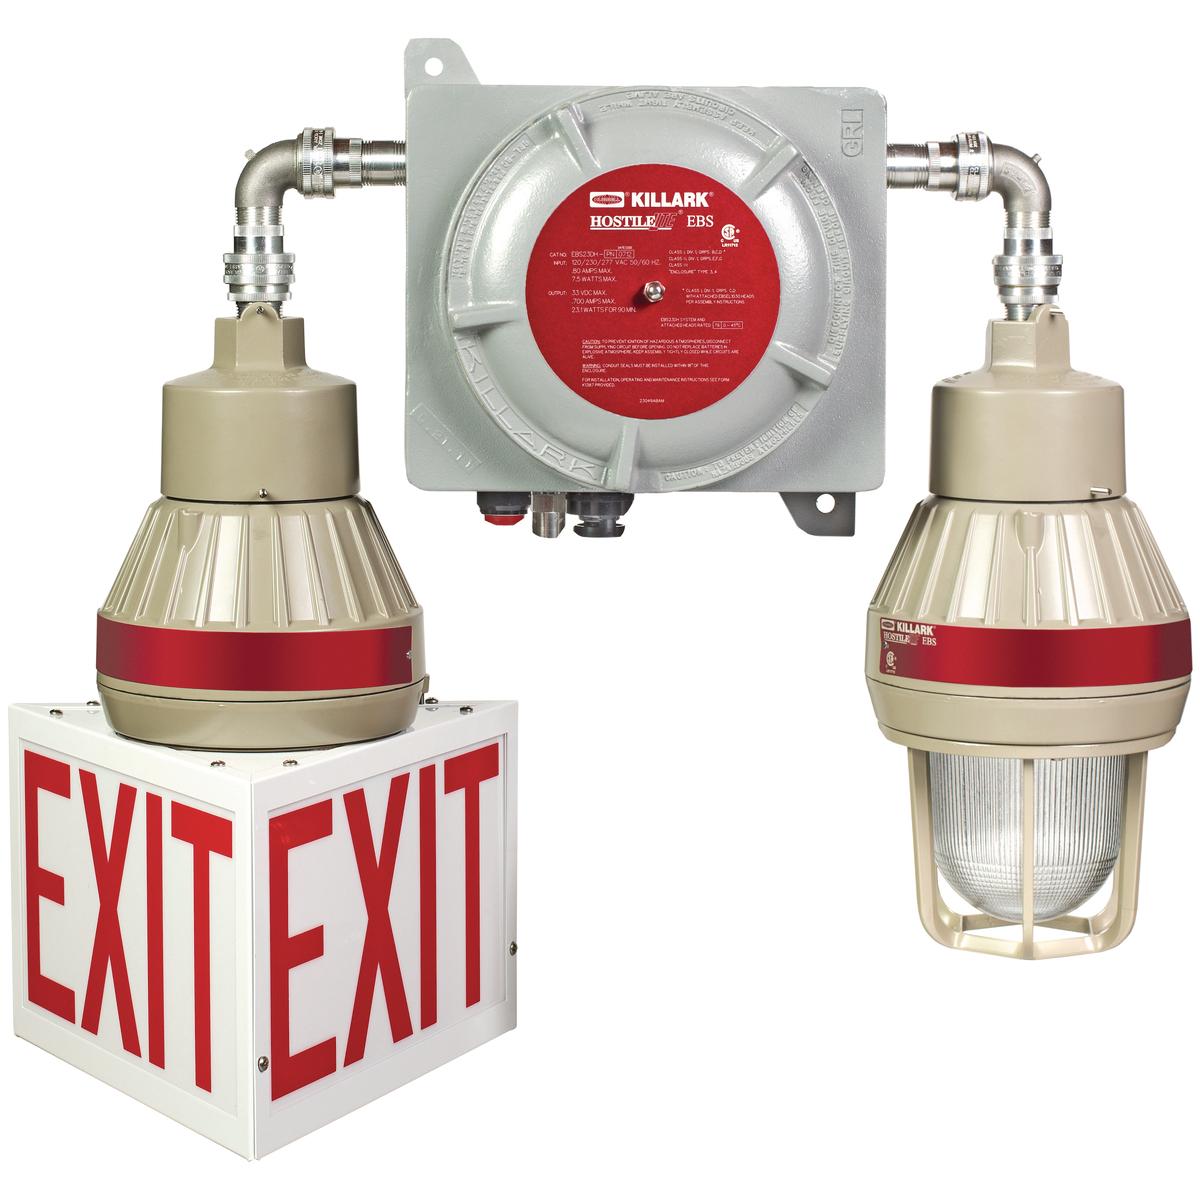 Hubbell EBS23DH-PTBE The EBS Series Explosion Proof LED Emergency Battery Backup System is designed for egress or anti-panic applications. This fixture is made with a cast copper-free aluminum housing and fixture heads that are powder epoxy powder coat painted for extra corro